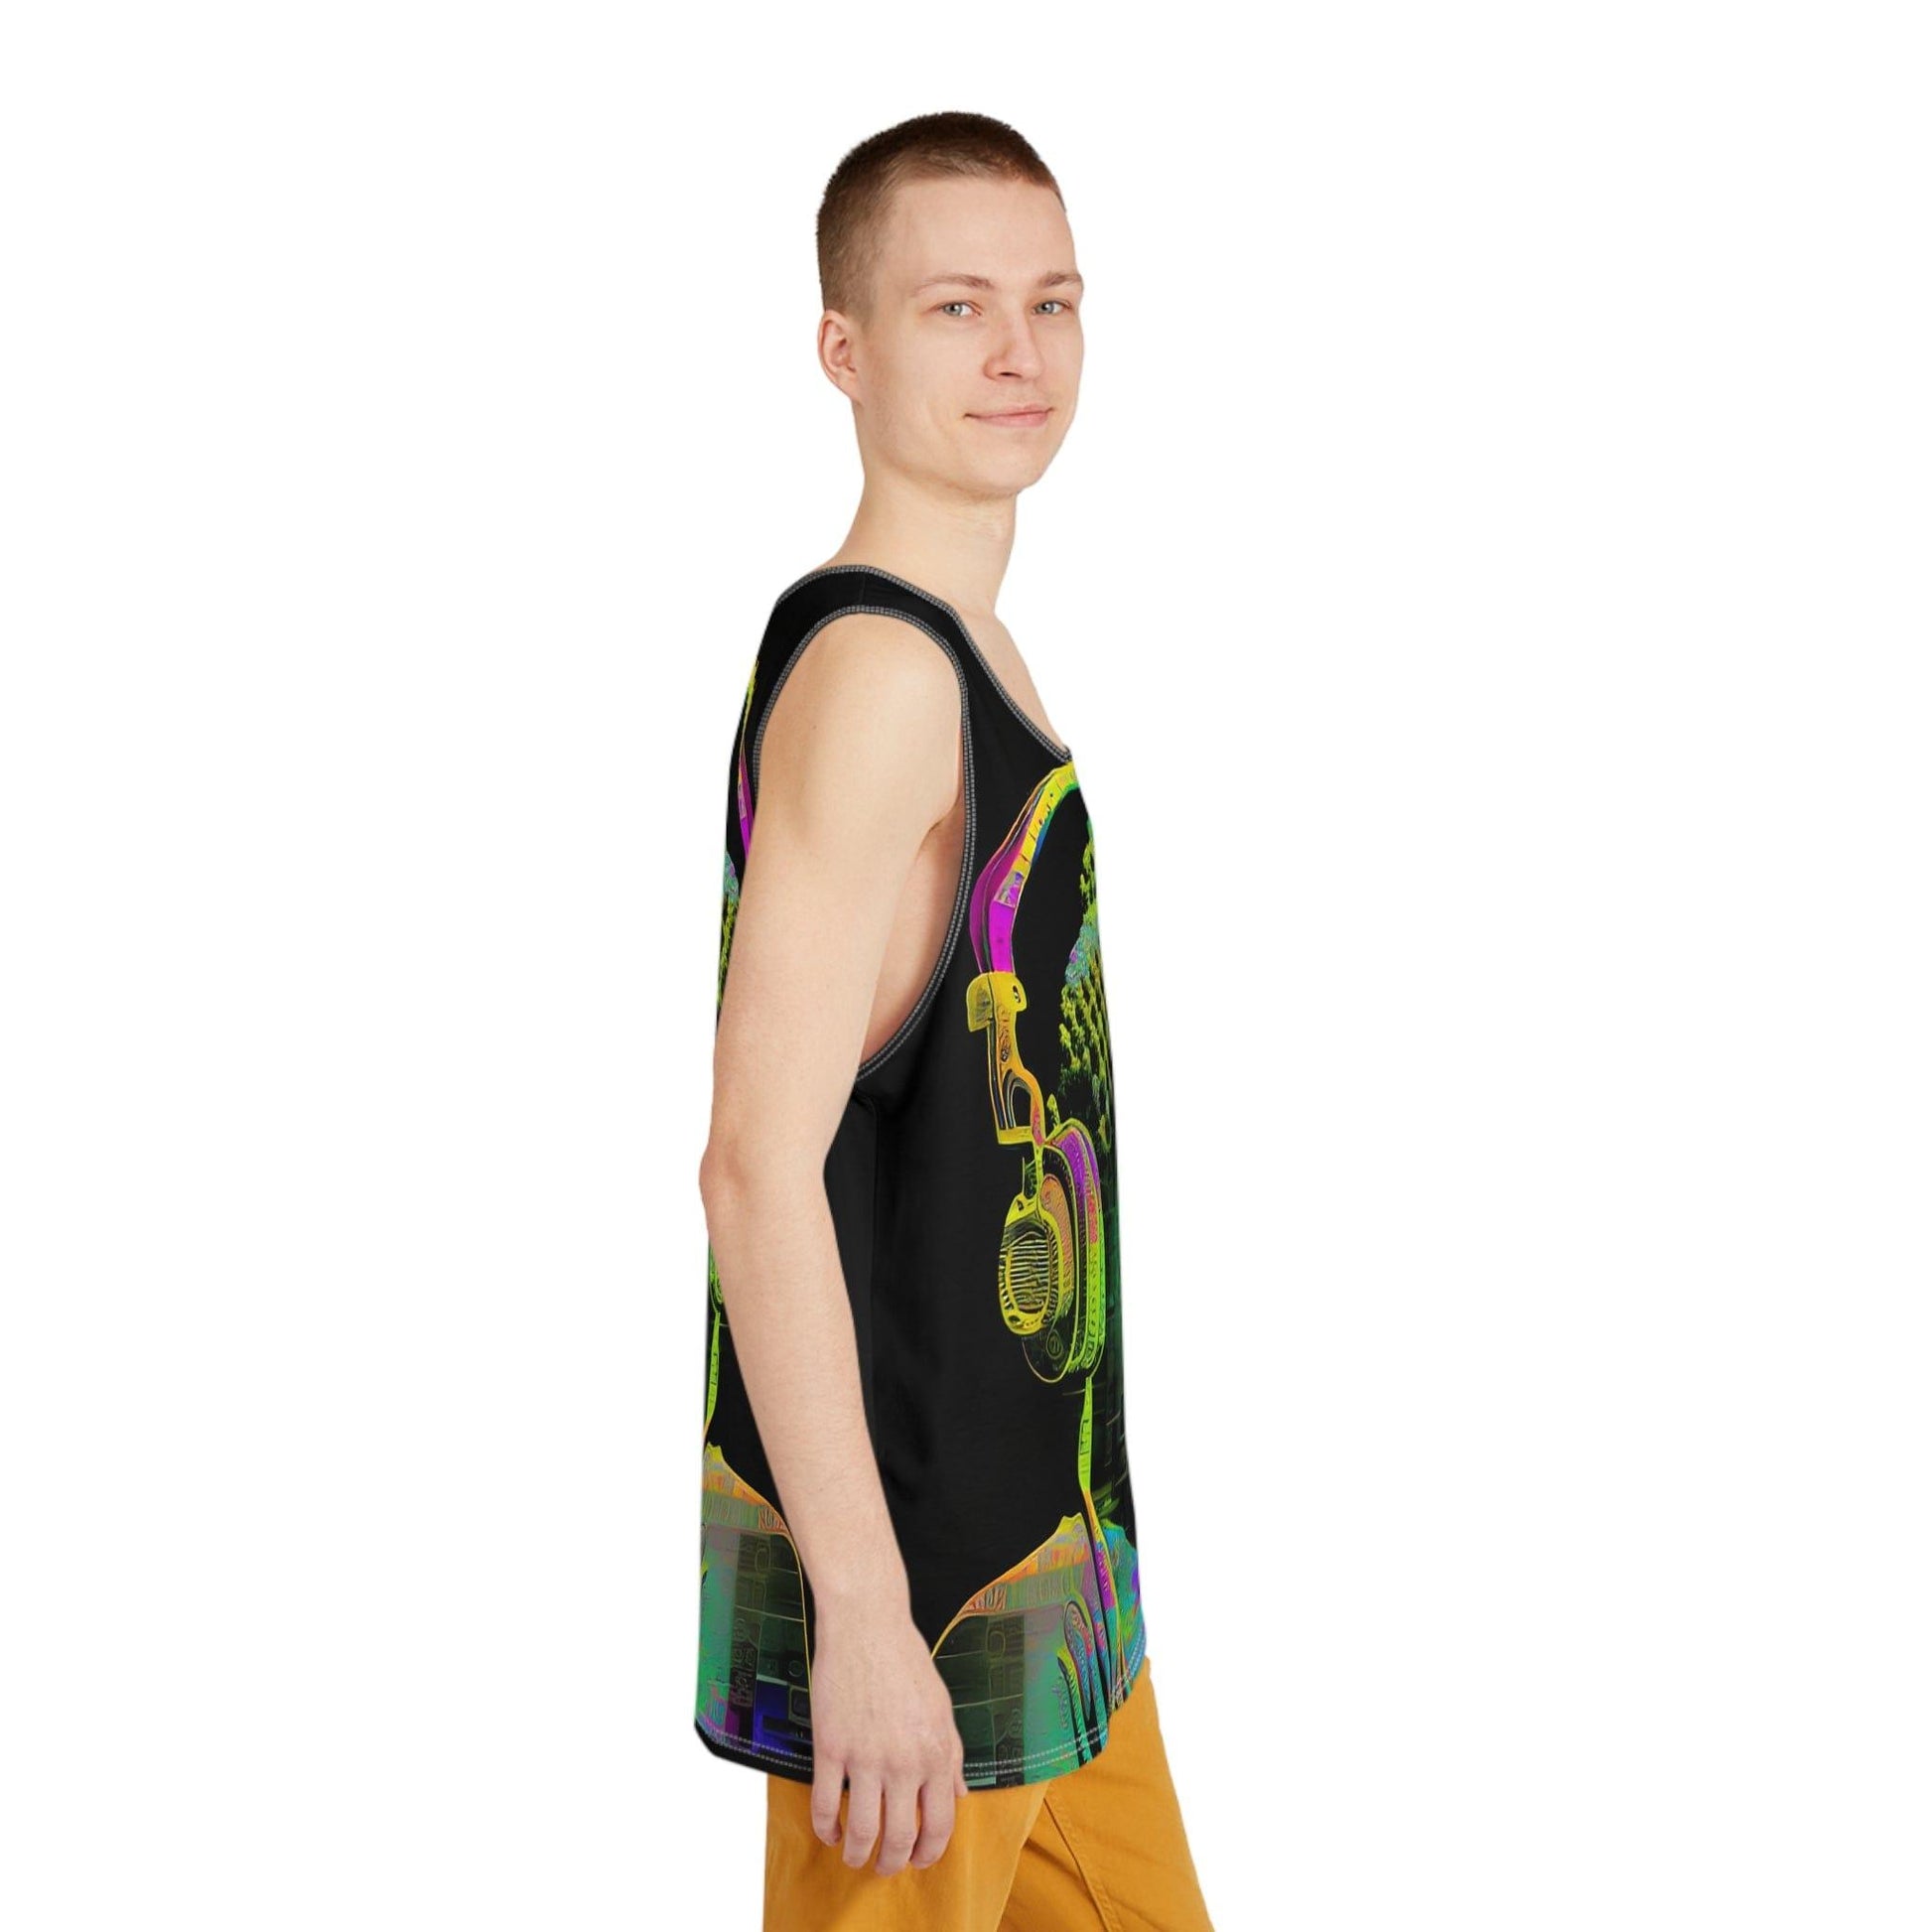 Subtle Smiling Buddha Wearing Headphones Sublimation Print All-Over Design Tank Top - Stylish Comfort for Gym and Streetwear - Alchemystics.org